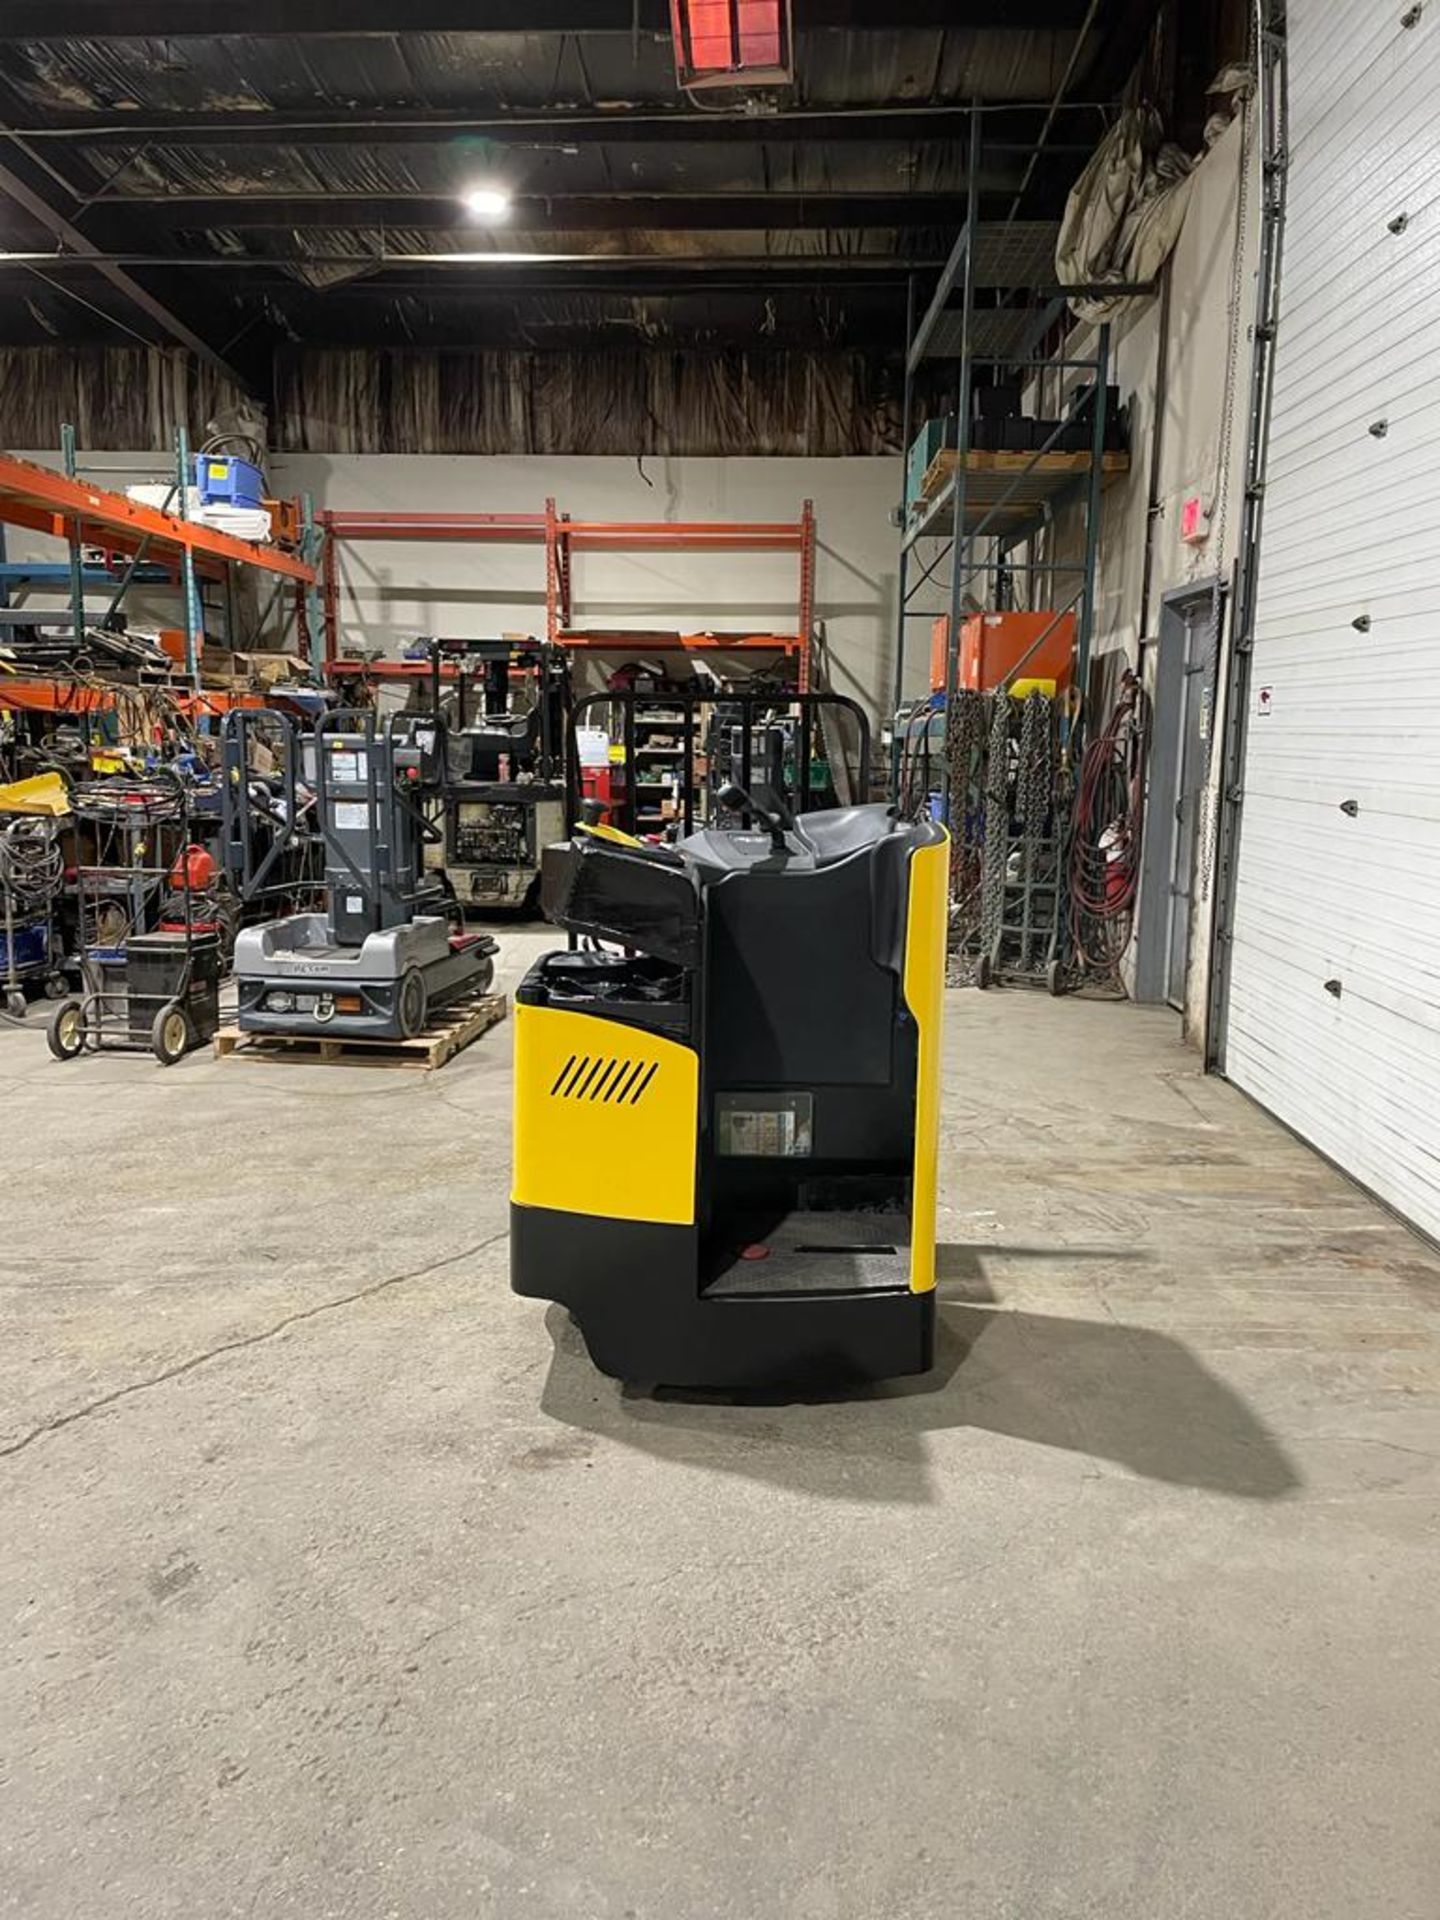 NICE 2015 Hyster Ride-On END RIDER Powered Pallet Truck 8' Long Forks 8000lbs capacity - 24V NICE - Image 2 of 3